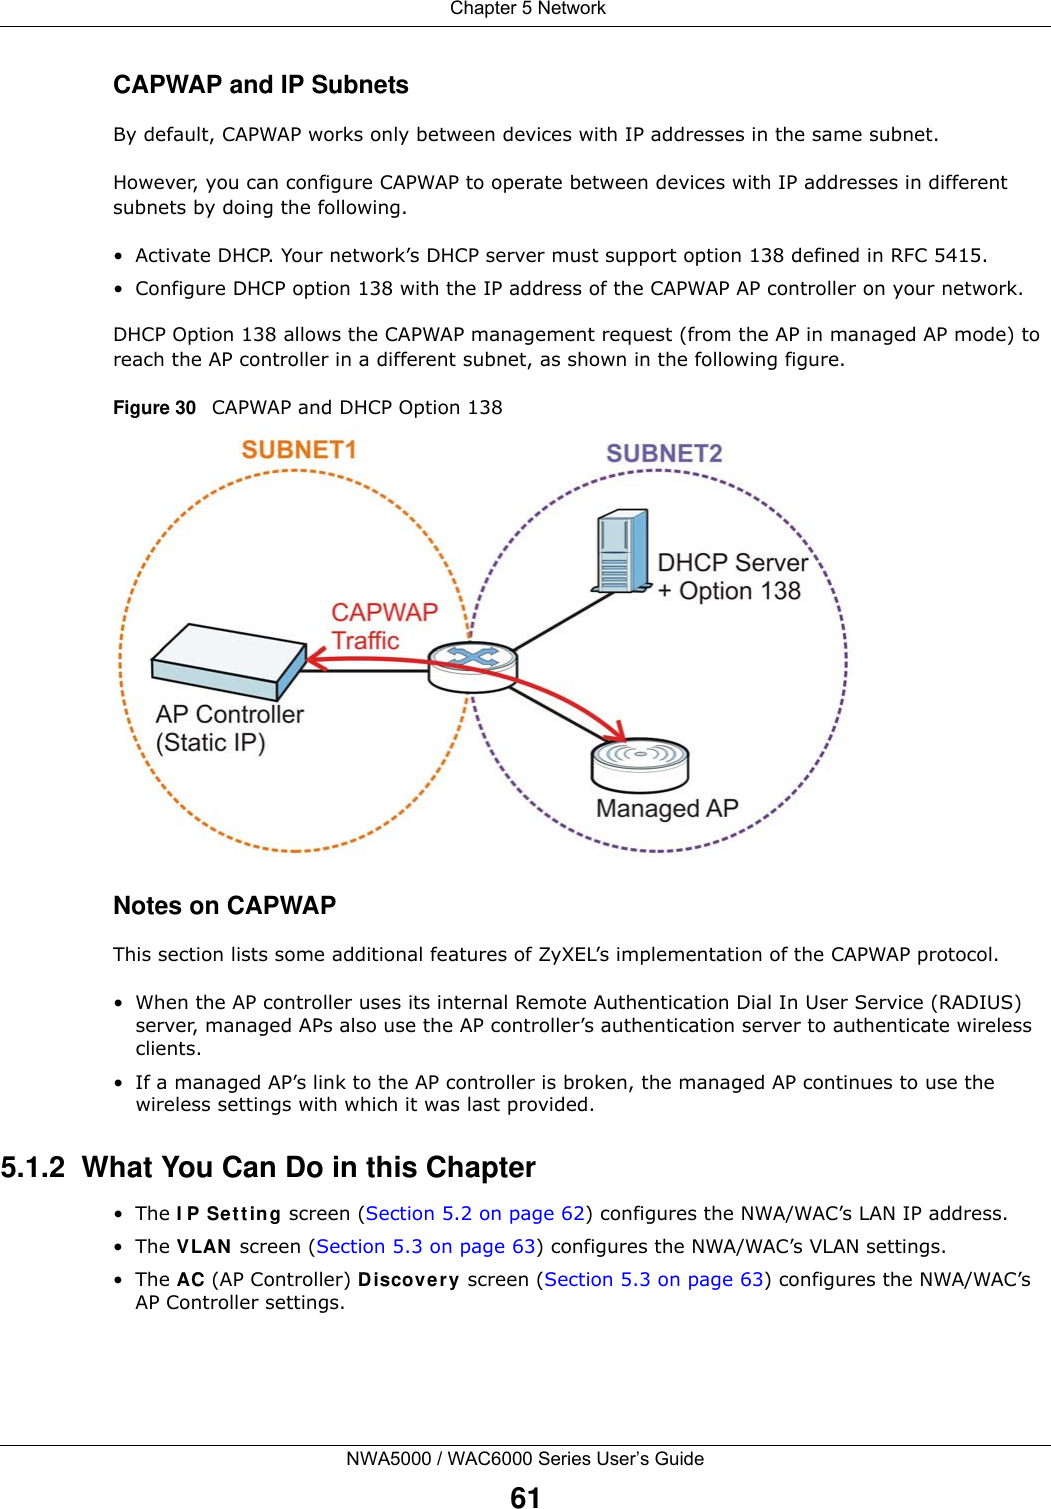  Chapter 5 NetworkNWA5000 / WAC6000 Series User’s Guide61CAPWAP and IP SubnetsBy default, CAPWAP works only between devices with IP addresses in the same subnet. However, you can configure CAPWAP to operate between devices with IP addresses in different subnets by doing the following.• Activate DHCP. Your network’s DHCP server must support option 138 defined in RFC 5415.• Configure DHCP option 138 with the IP address of the CAPWAP AP controller on your network.DHCP Option 138 allows the CAPWAP management request (from the AP in managed AP mode) to reach the AP controller in a different subnet, as shown in the following figure.Figure 30   CAPWAP and DHCP Option 138 Notes on CAPWAPThis section lists some additional features of ZyXEL’s implementation of the CAPWAP protocol.• When the AP controller uses its internal Remote Authentication Dial In User Service (RADIUS) server, managed APs also use the AP controller’s authentication server to authenticate wireless clients.• If a managed AP’s link to the AP controller is broken, the managed AP continues to use the wireless settings with which it was last provided.5.1.2  What You Can Do in this Chapter•The I P Set ting screen (Section 5.2 on page 62) configures the NWA/WAC’s LAN IP address. •The VLAN  screen (Section 5.3 on page 63) configures the NWA/WAC’s VLAN settings. •The AC (AP Controller) Discover y screen (Section 5.3 on page 63) configures the NWA/WAC’s AP Controller settings.